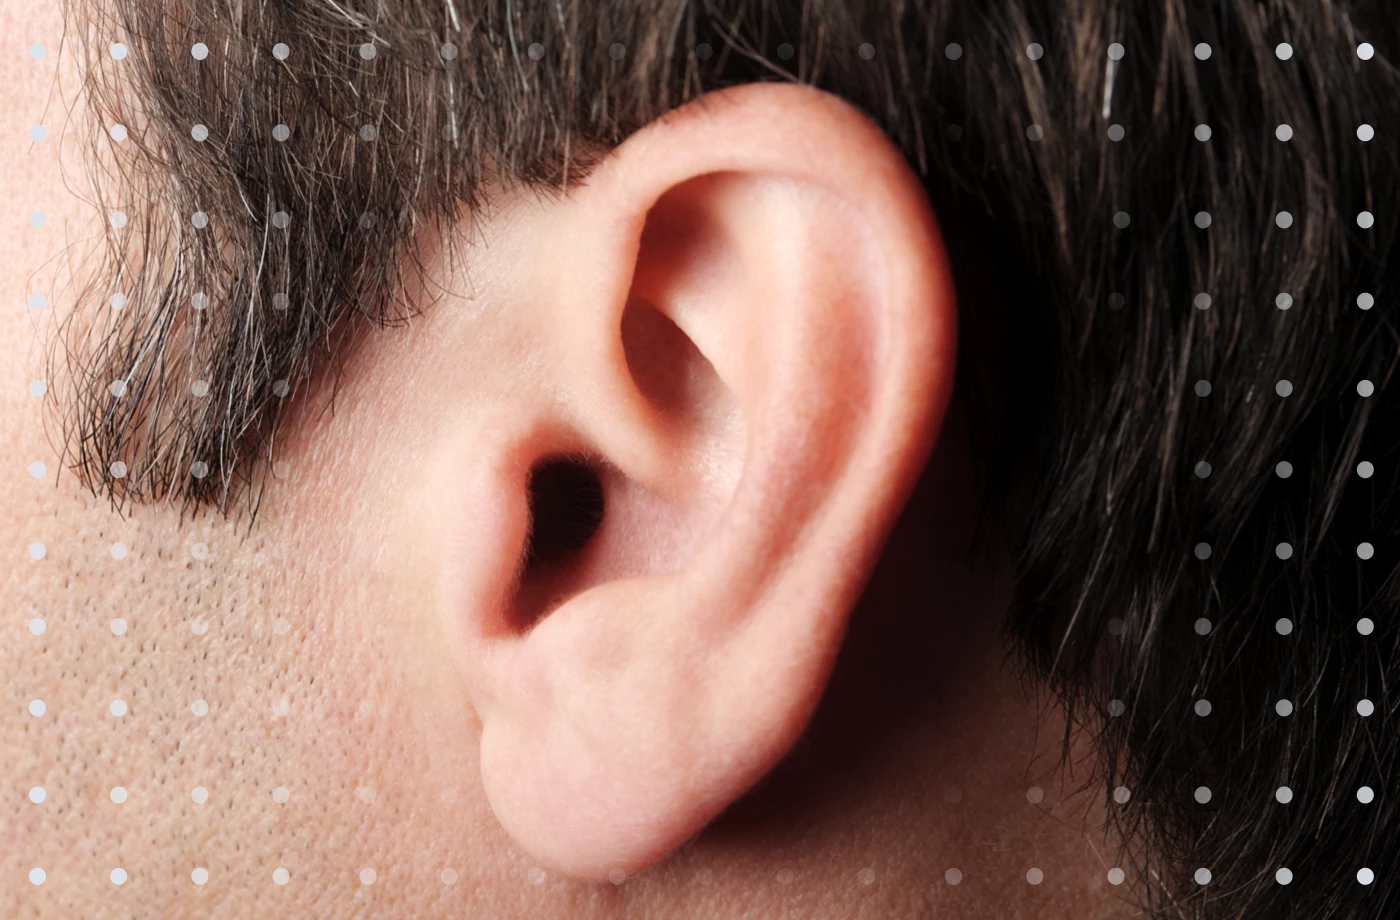 Hearing support